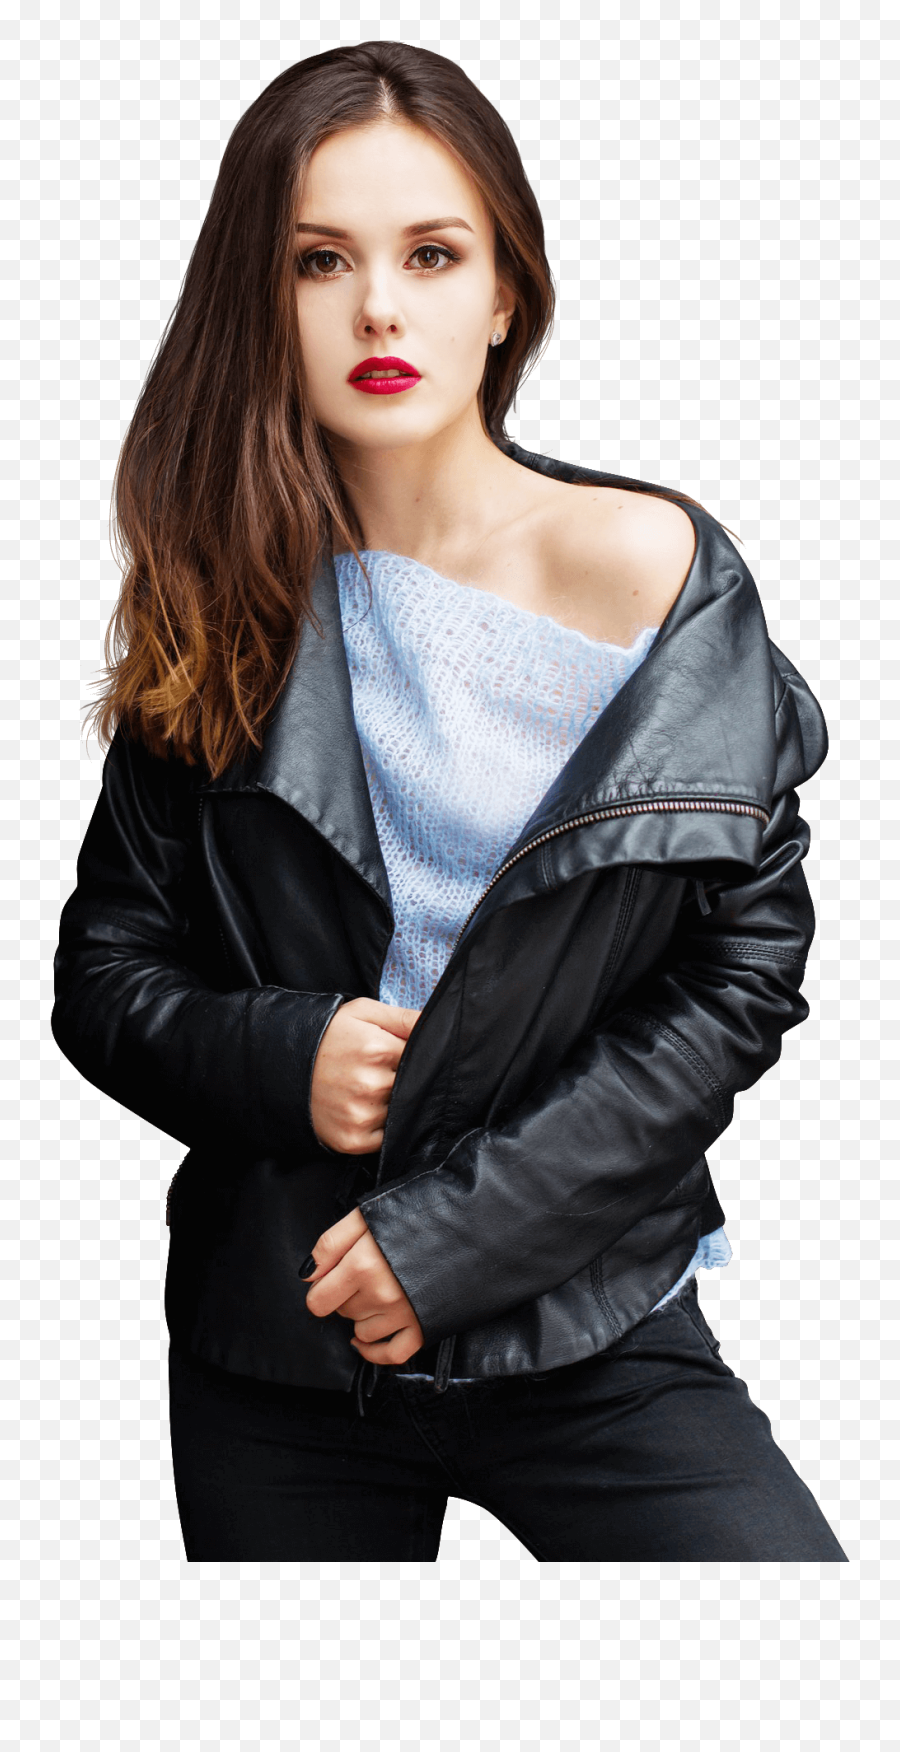 Girl With Black Leather Jacket Png Transparent